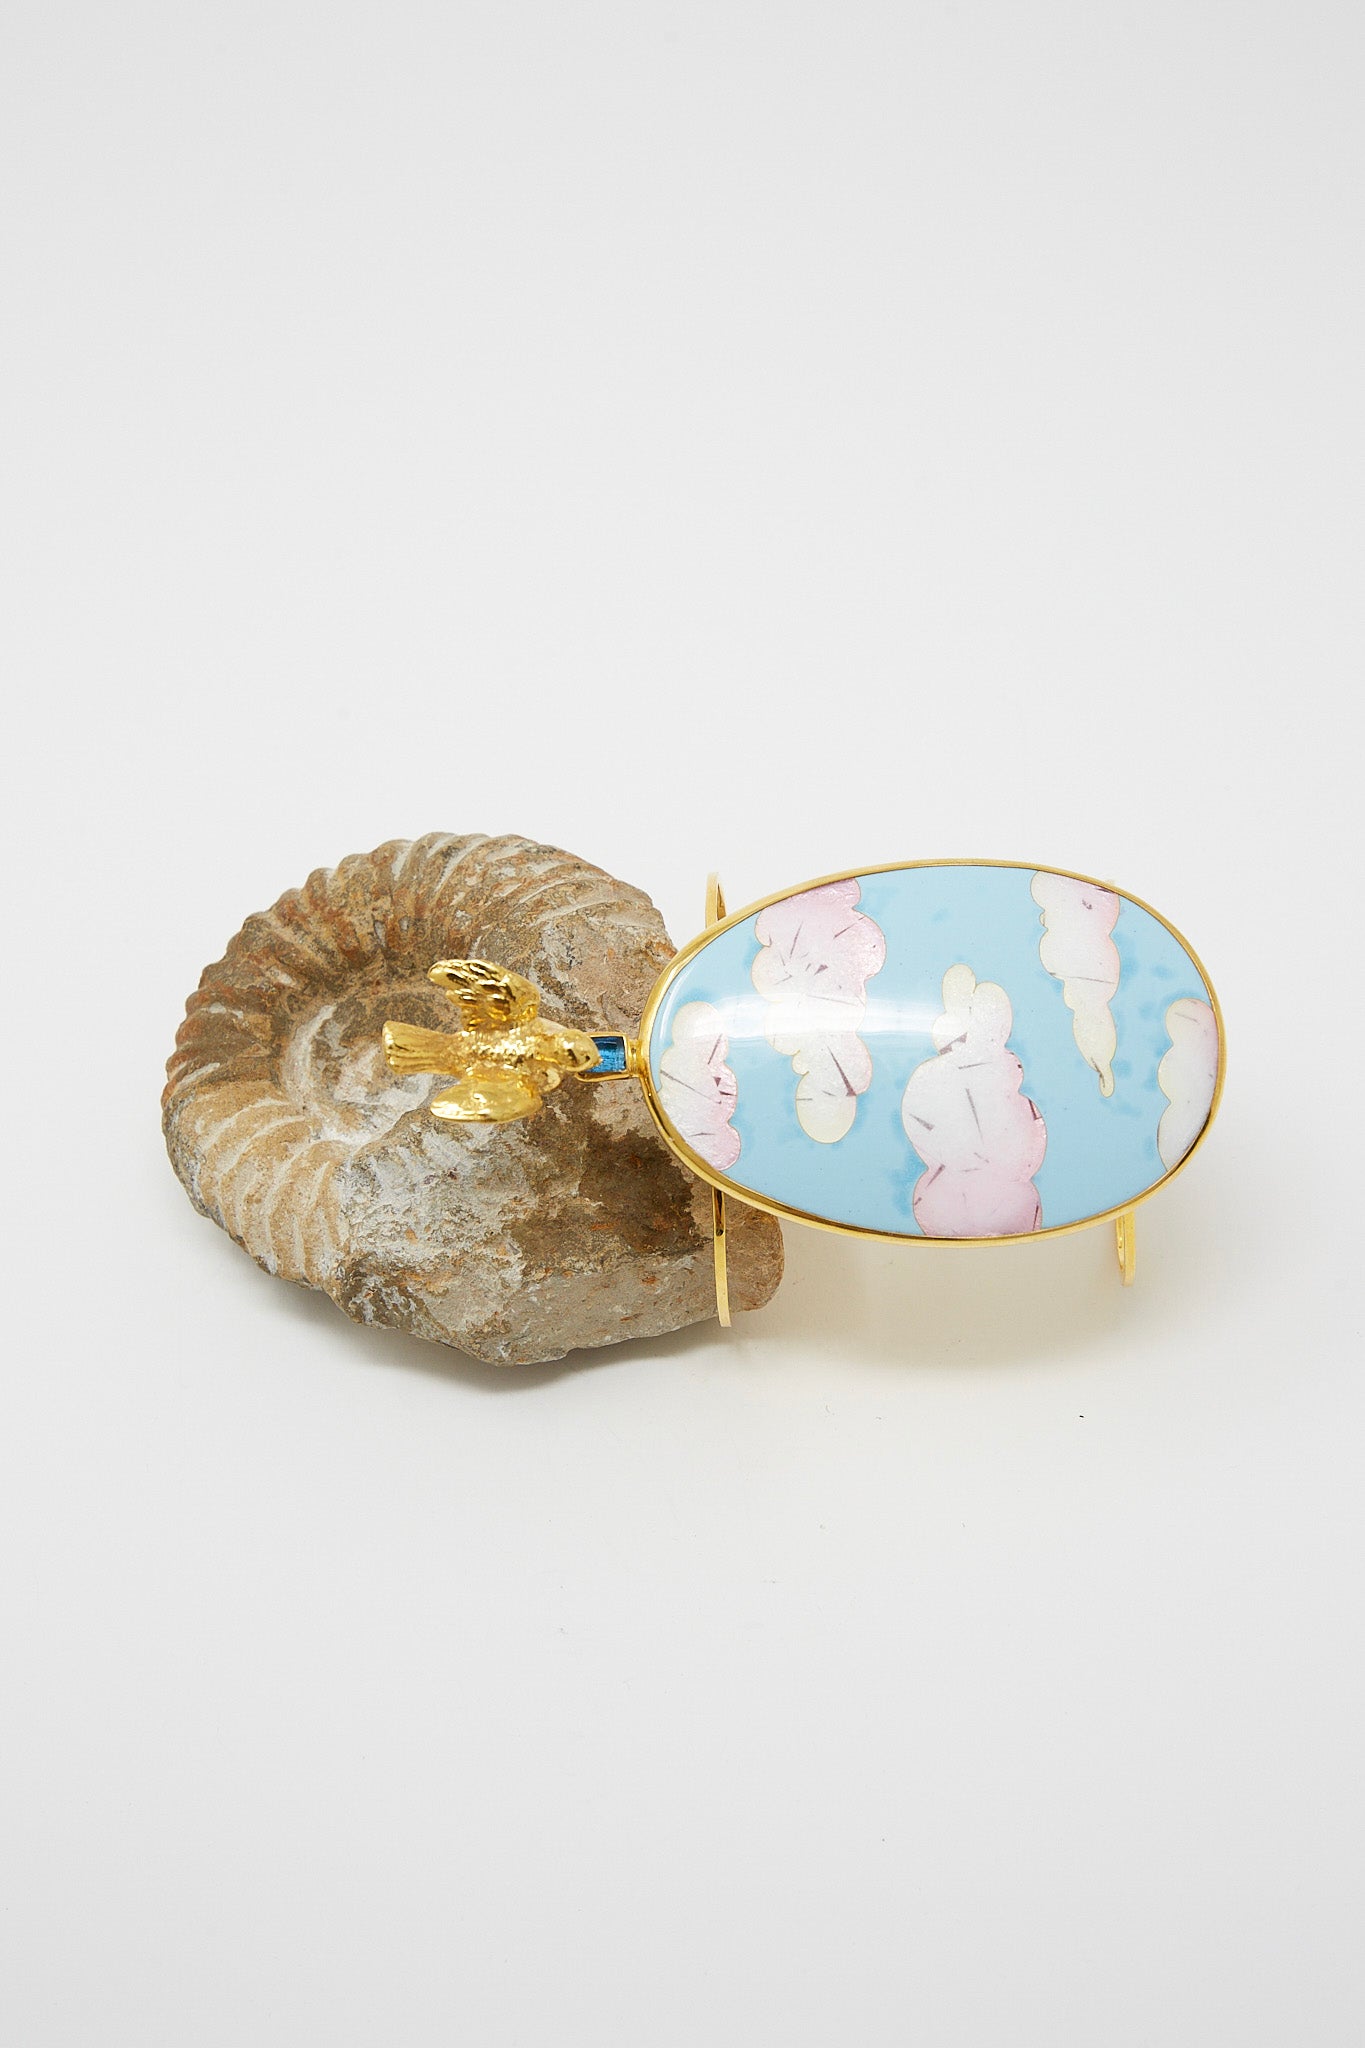 A blue and white enamel bracelet in Clouds with Bird by Sofio Gongli on a rock. Side view.